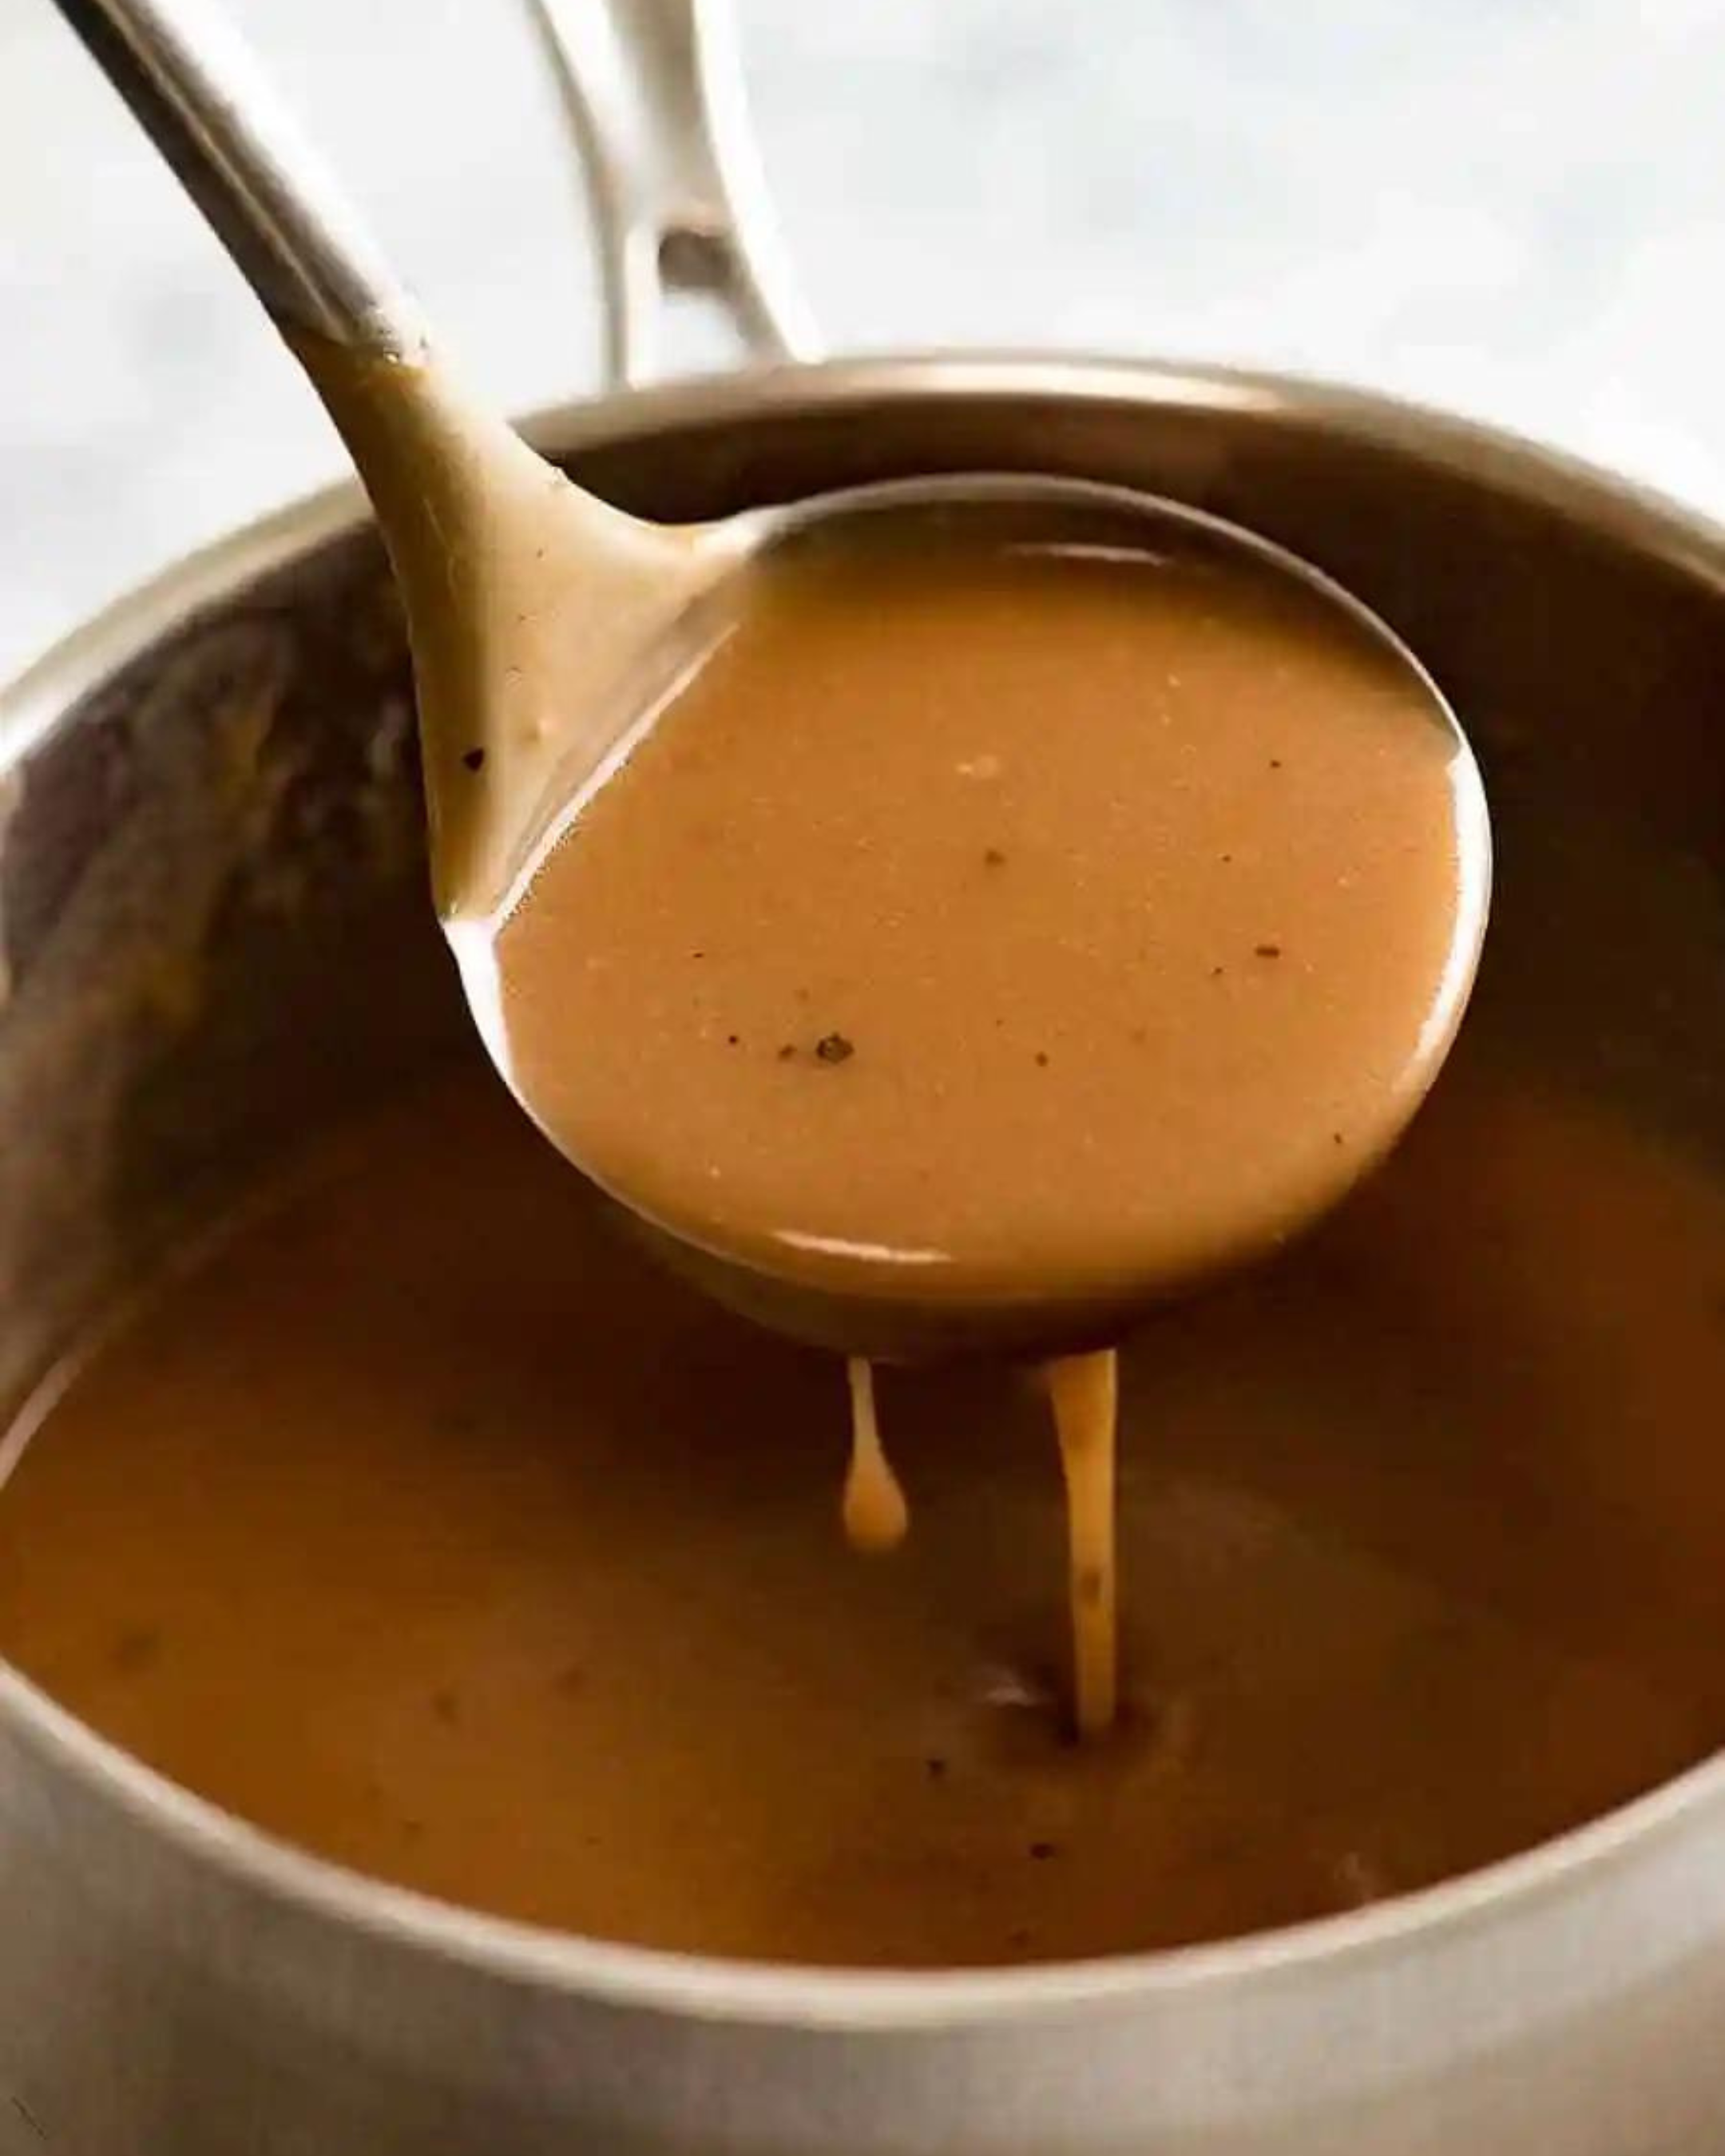 Gravy recipe – easy, from scratch, no drippings